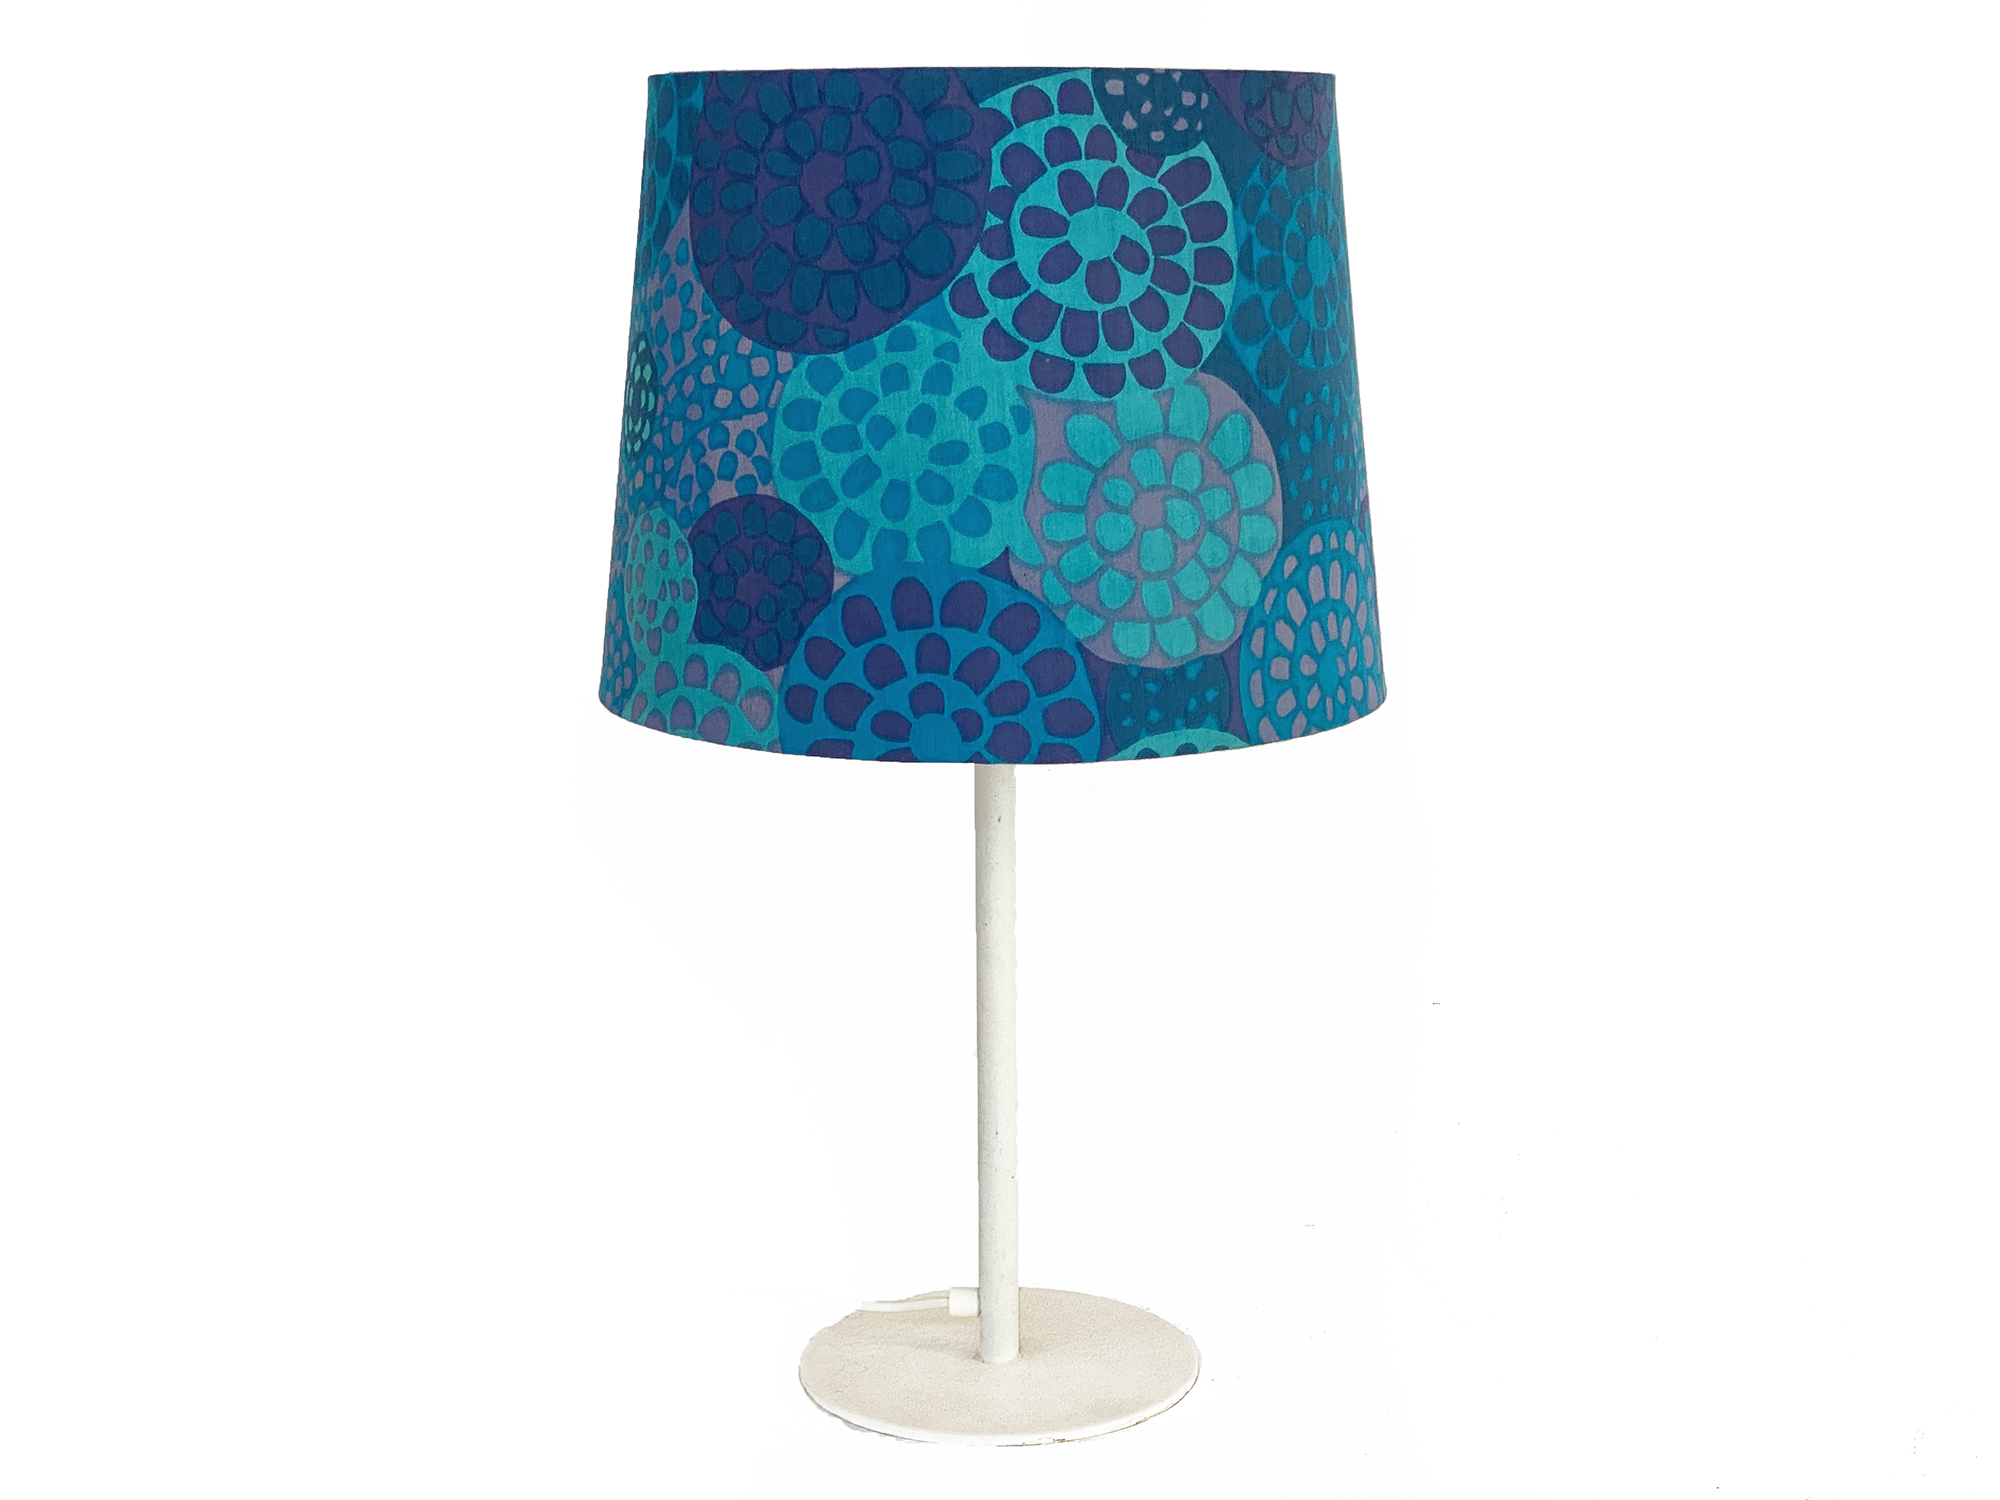 Metal table lamp by Uno and Östen Kristiansson for Luxus. Shade from repurposed fabric by Metsovaara. Sweden 1970s